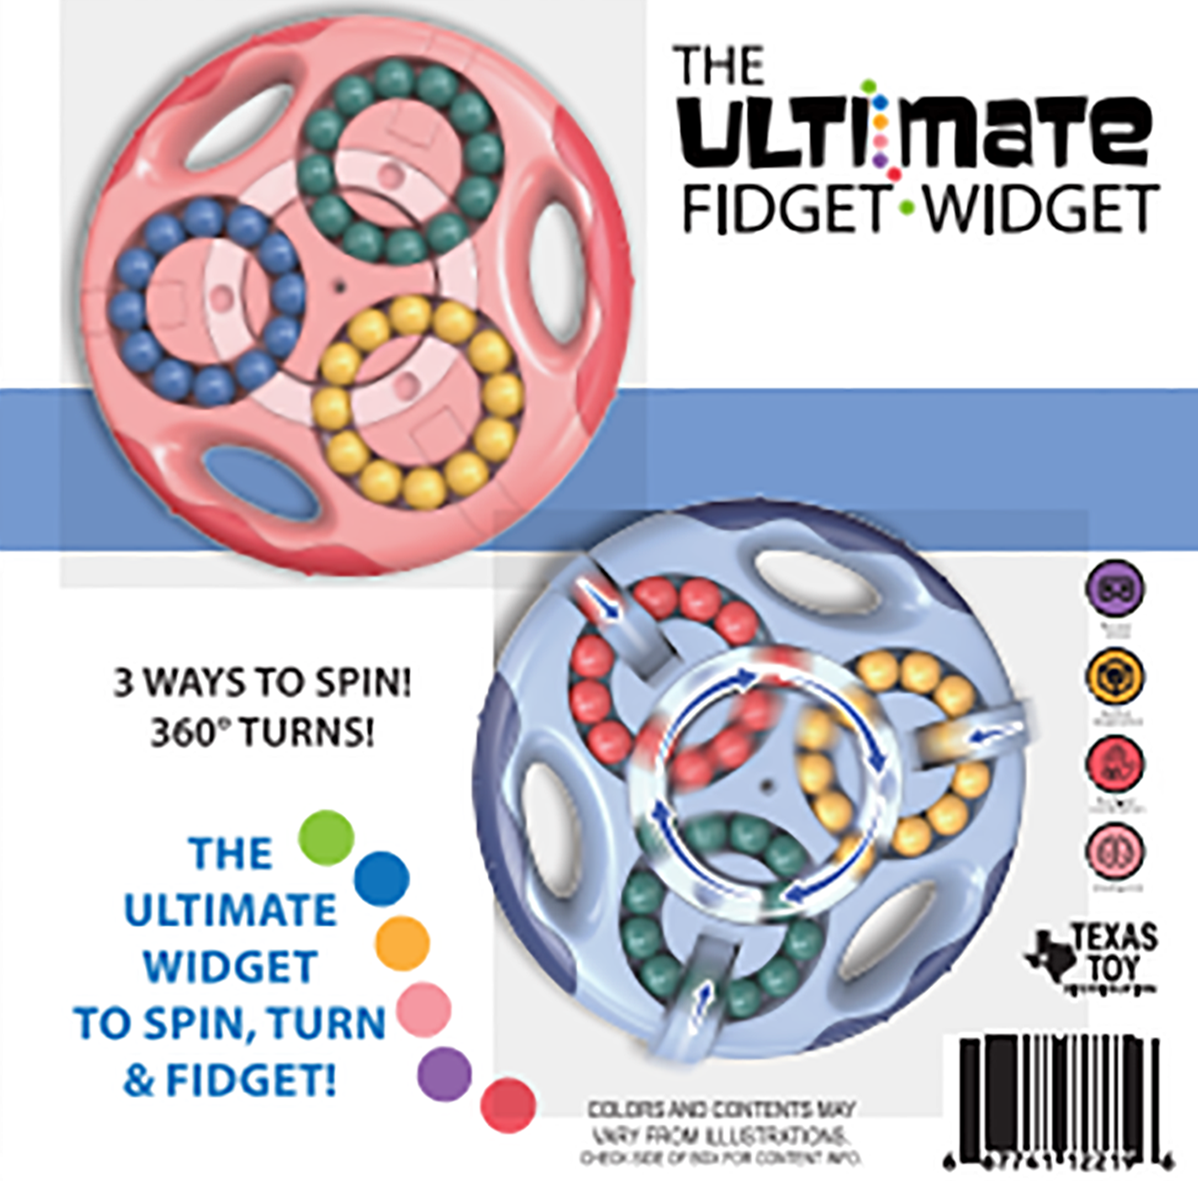 The Ultimate Fidget Widget Spinning Color Bead Match Toy